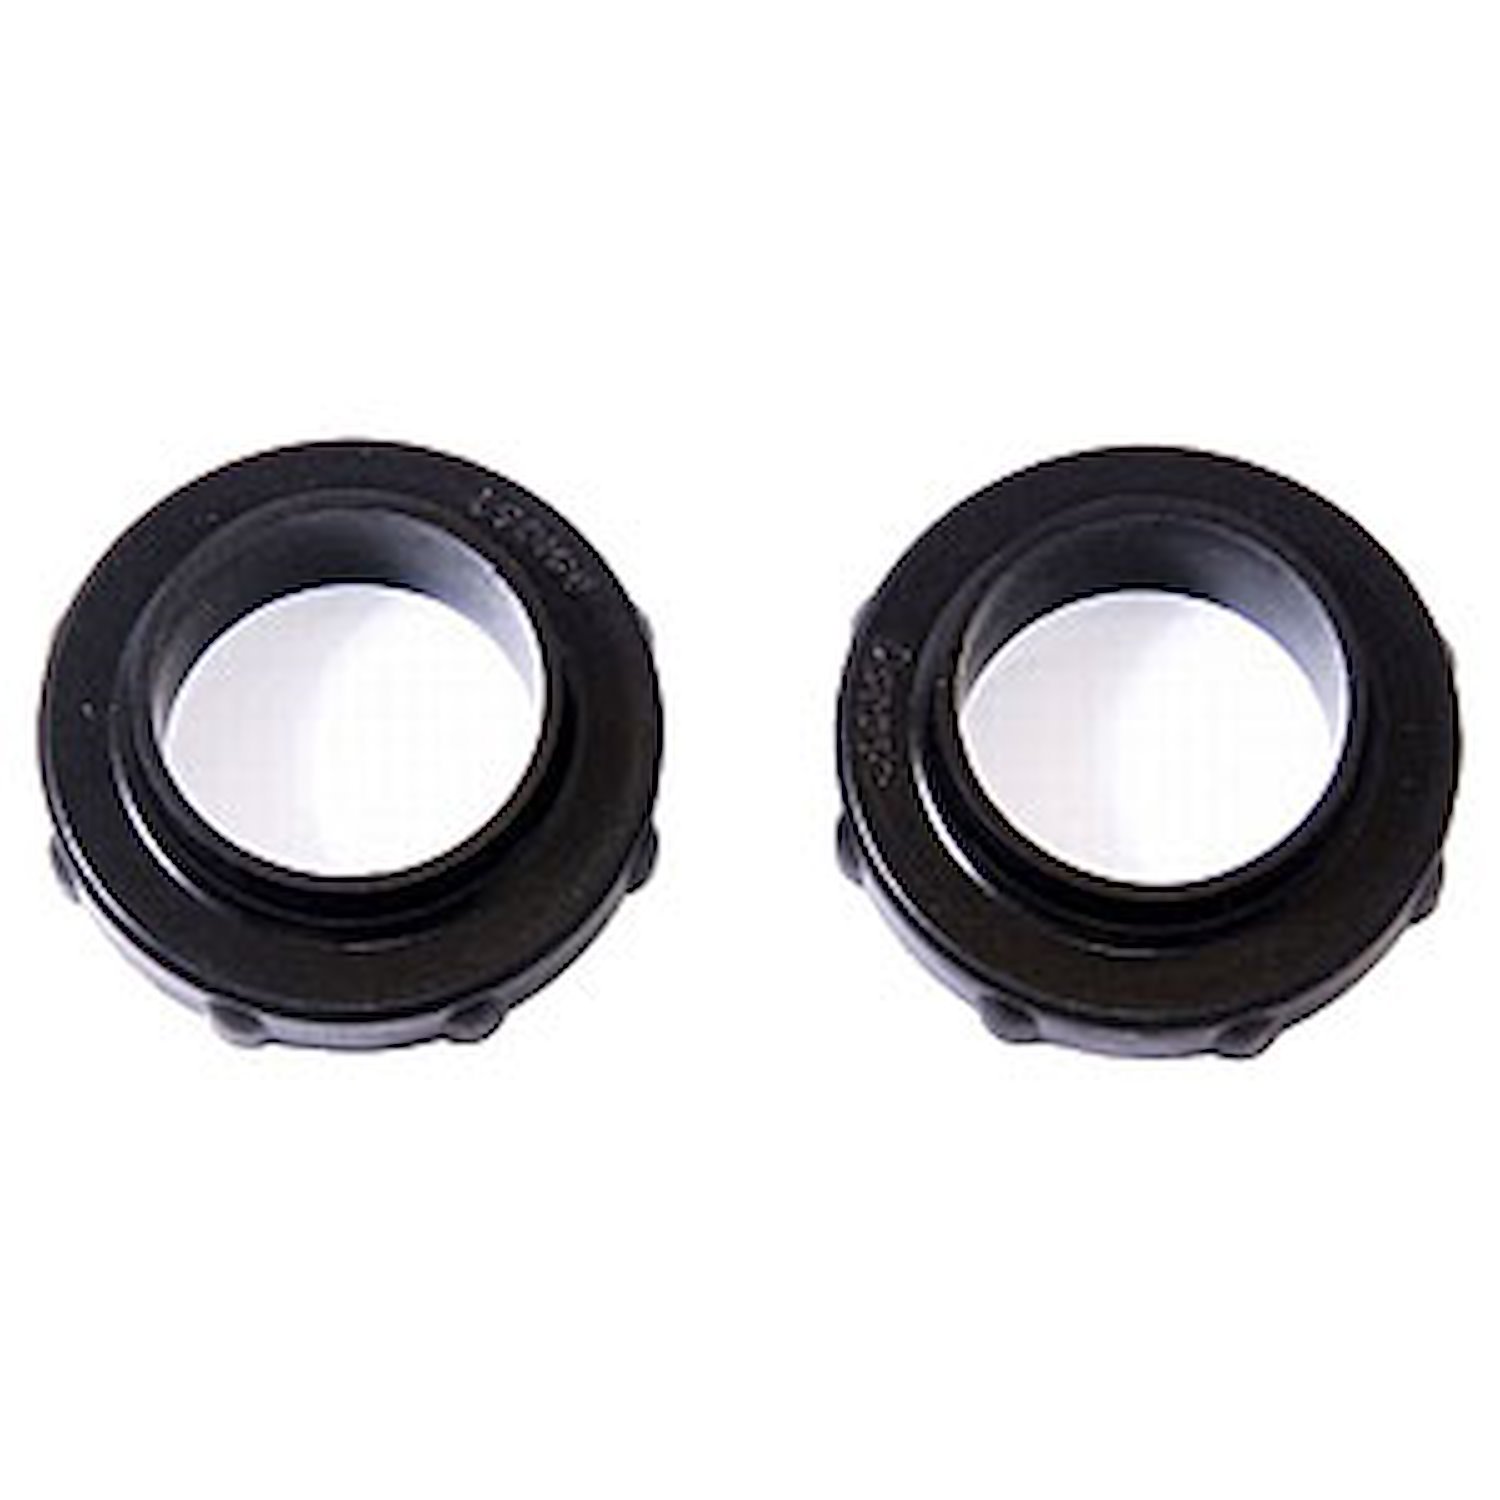 JL075PA Front Leveling Kit, Lift Amount: 0.75 in. Front/ Rear